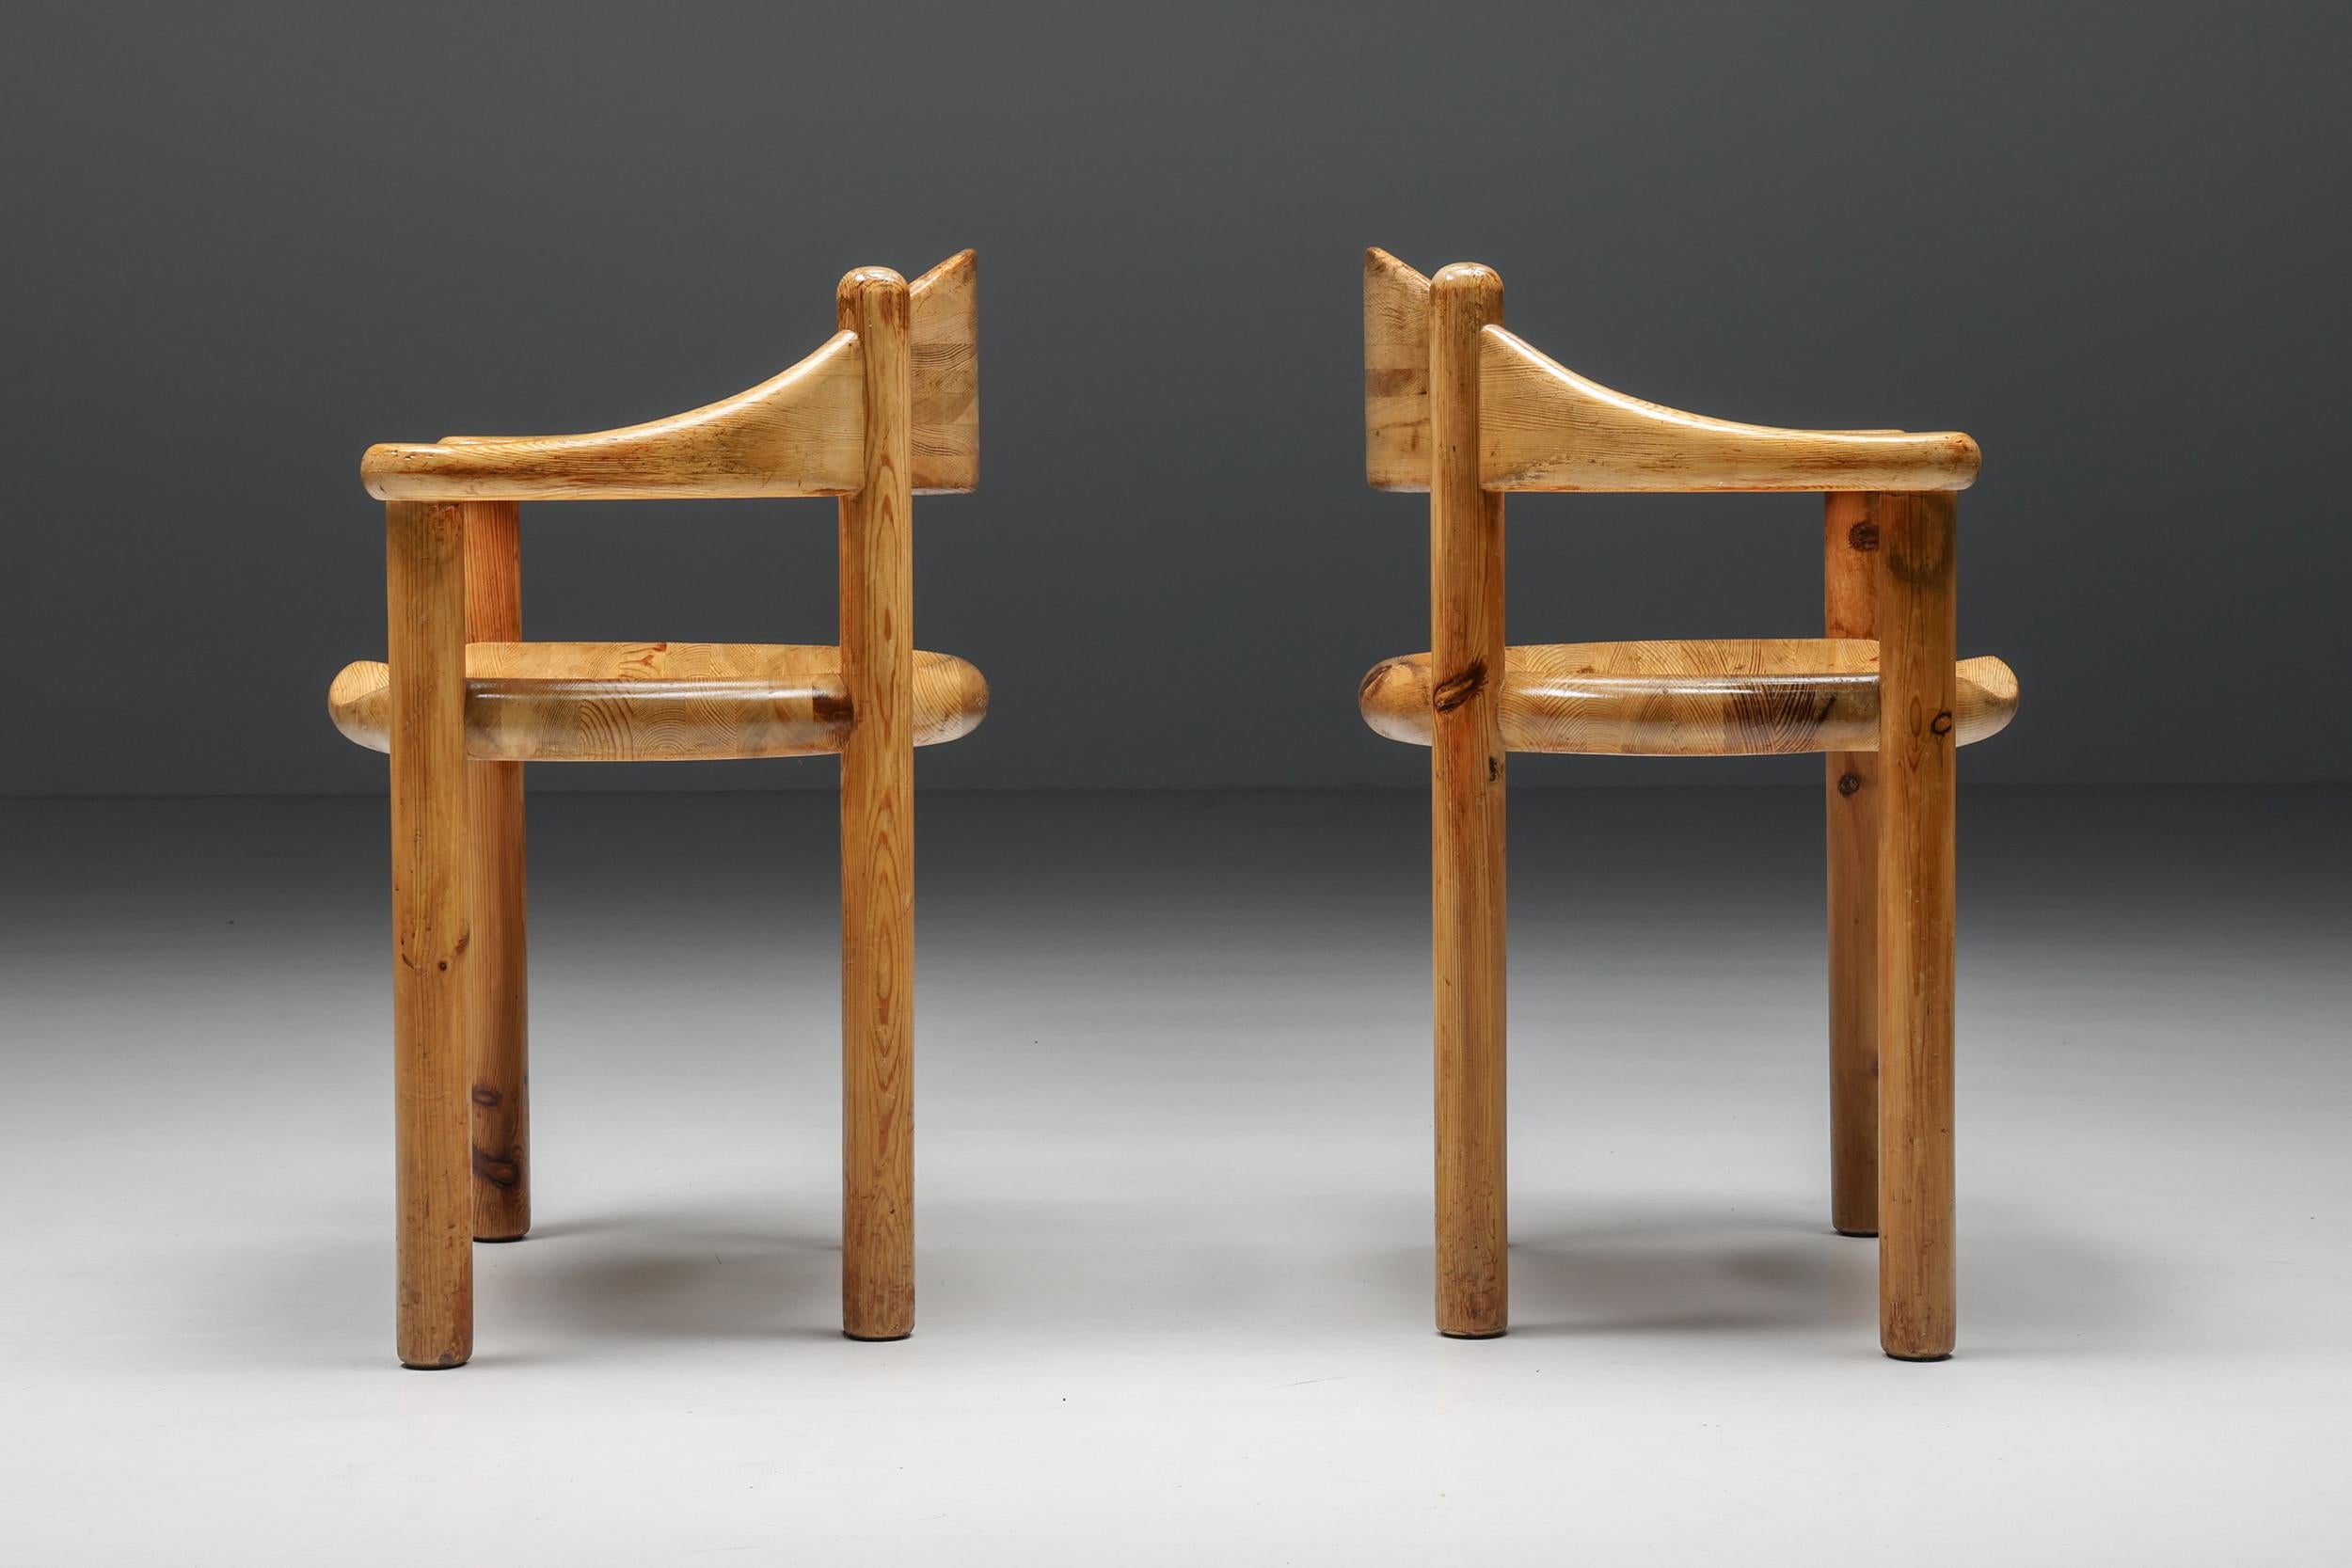 Rainer Daumiller Carver chairs for Hirtshals Savvaerk, Denmark, 1970s. Midcentury armchairs by the Danish architect Rainer Daumiller, produced by Hirtshals Sawmill during the late 1970s. We have two of these dining chairs available, with solid pine